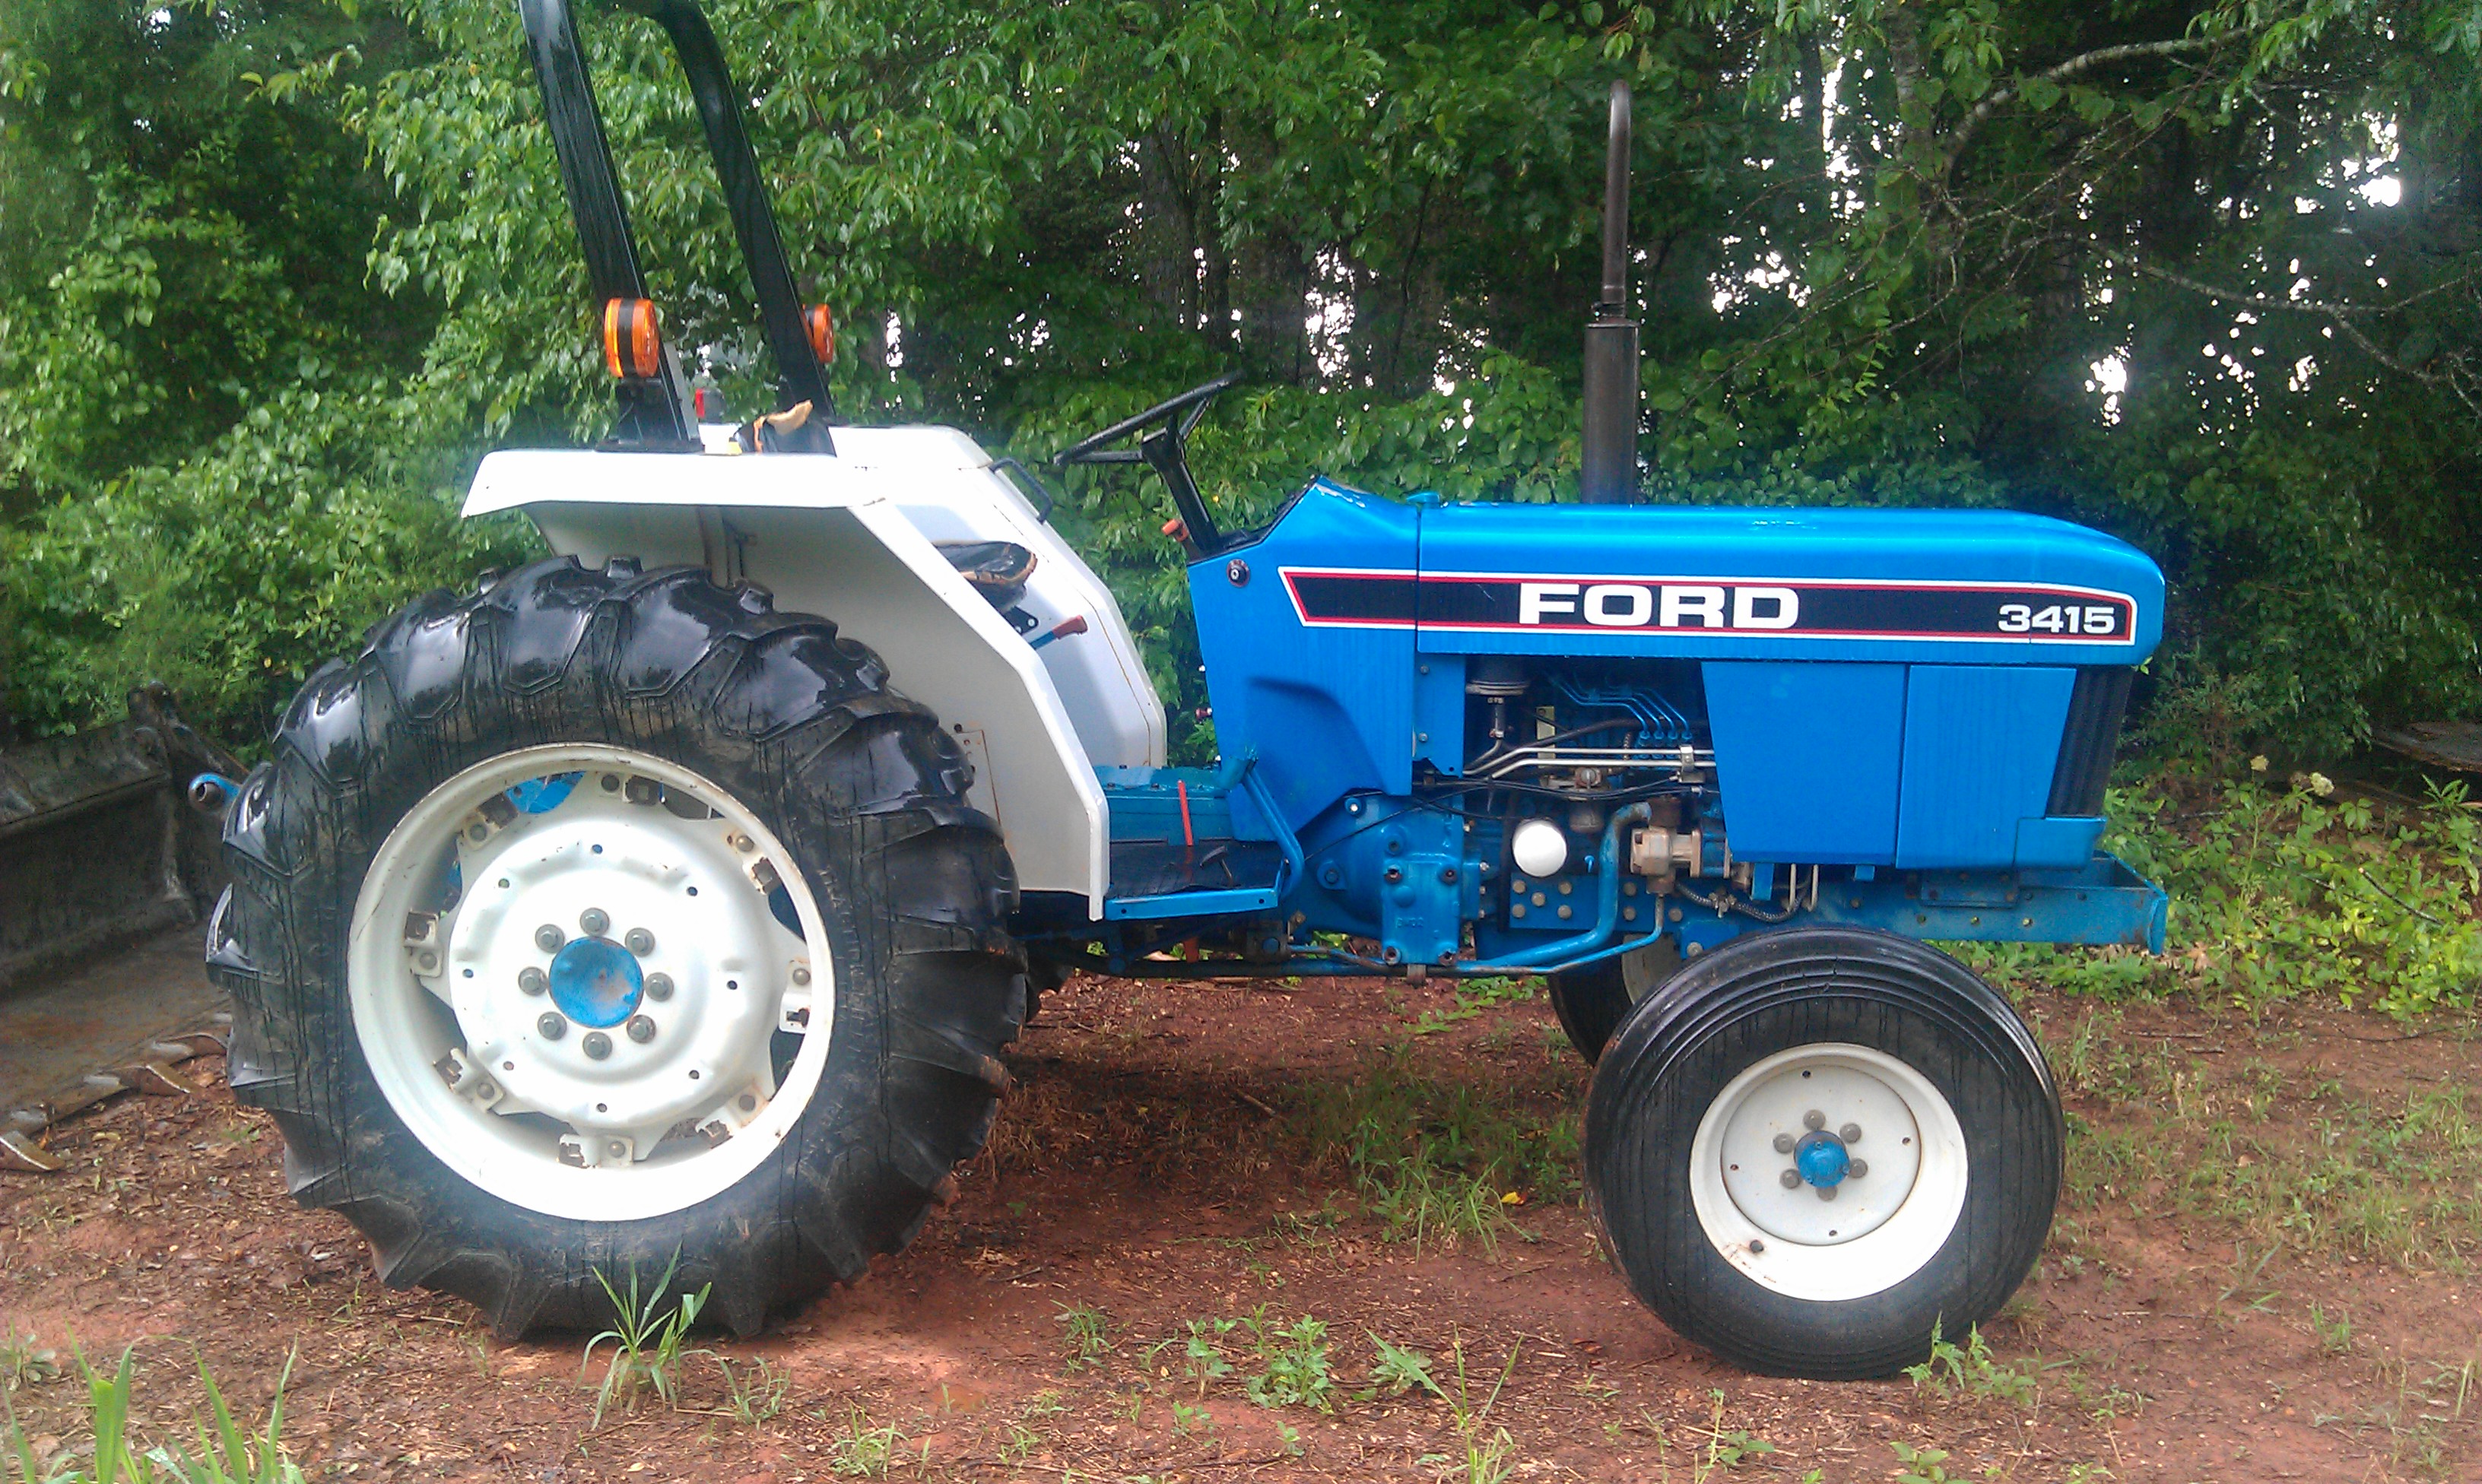 Ford 3415 Tractor Parts Helpline 1-866-441-8193 | Call Now!!!